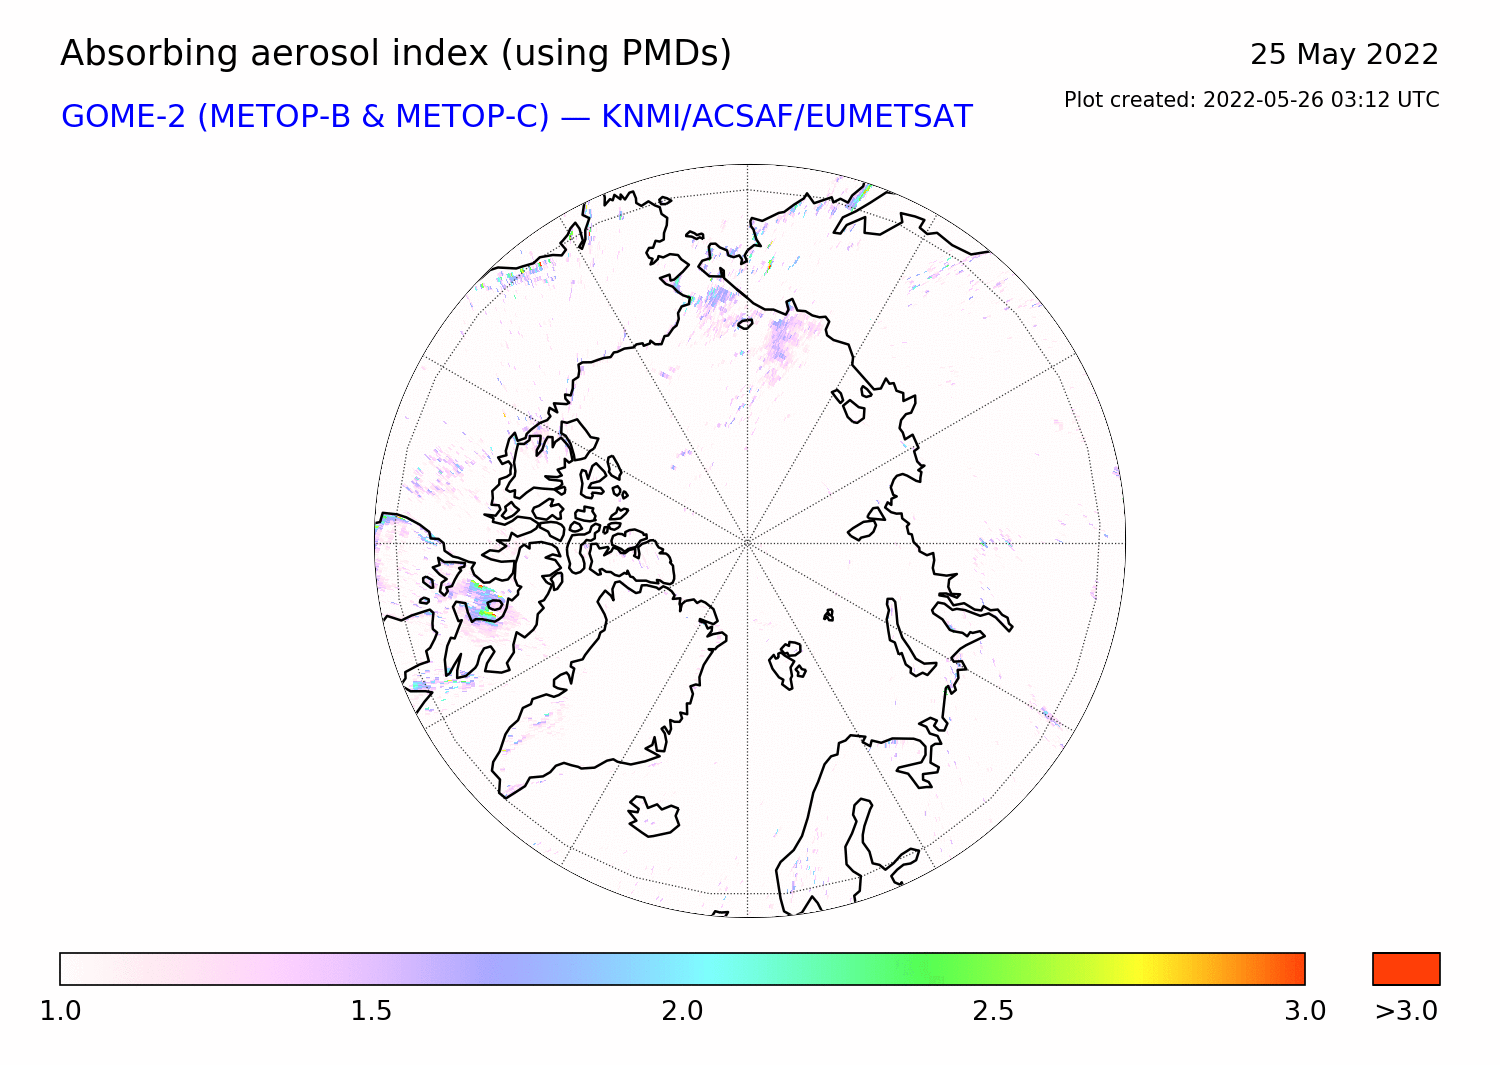 GOME-2 - Absorbing aerosol index of 25 May 2022